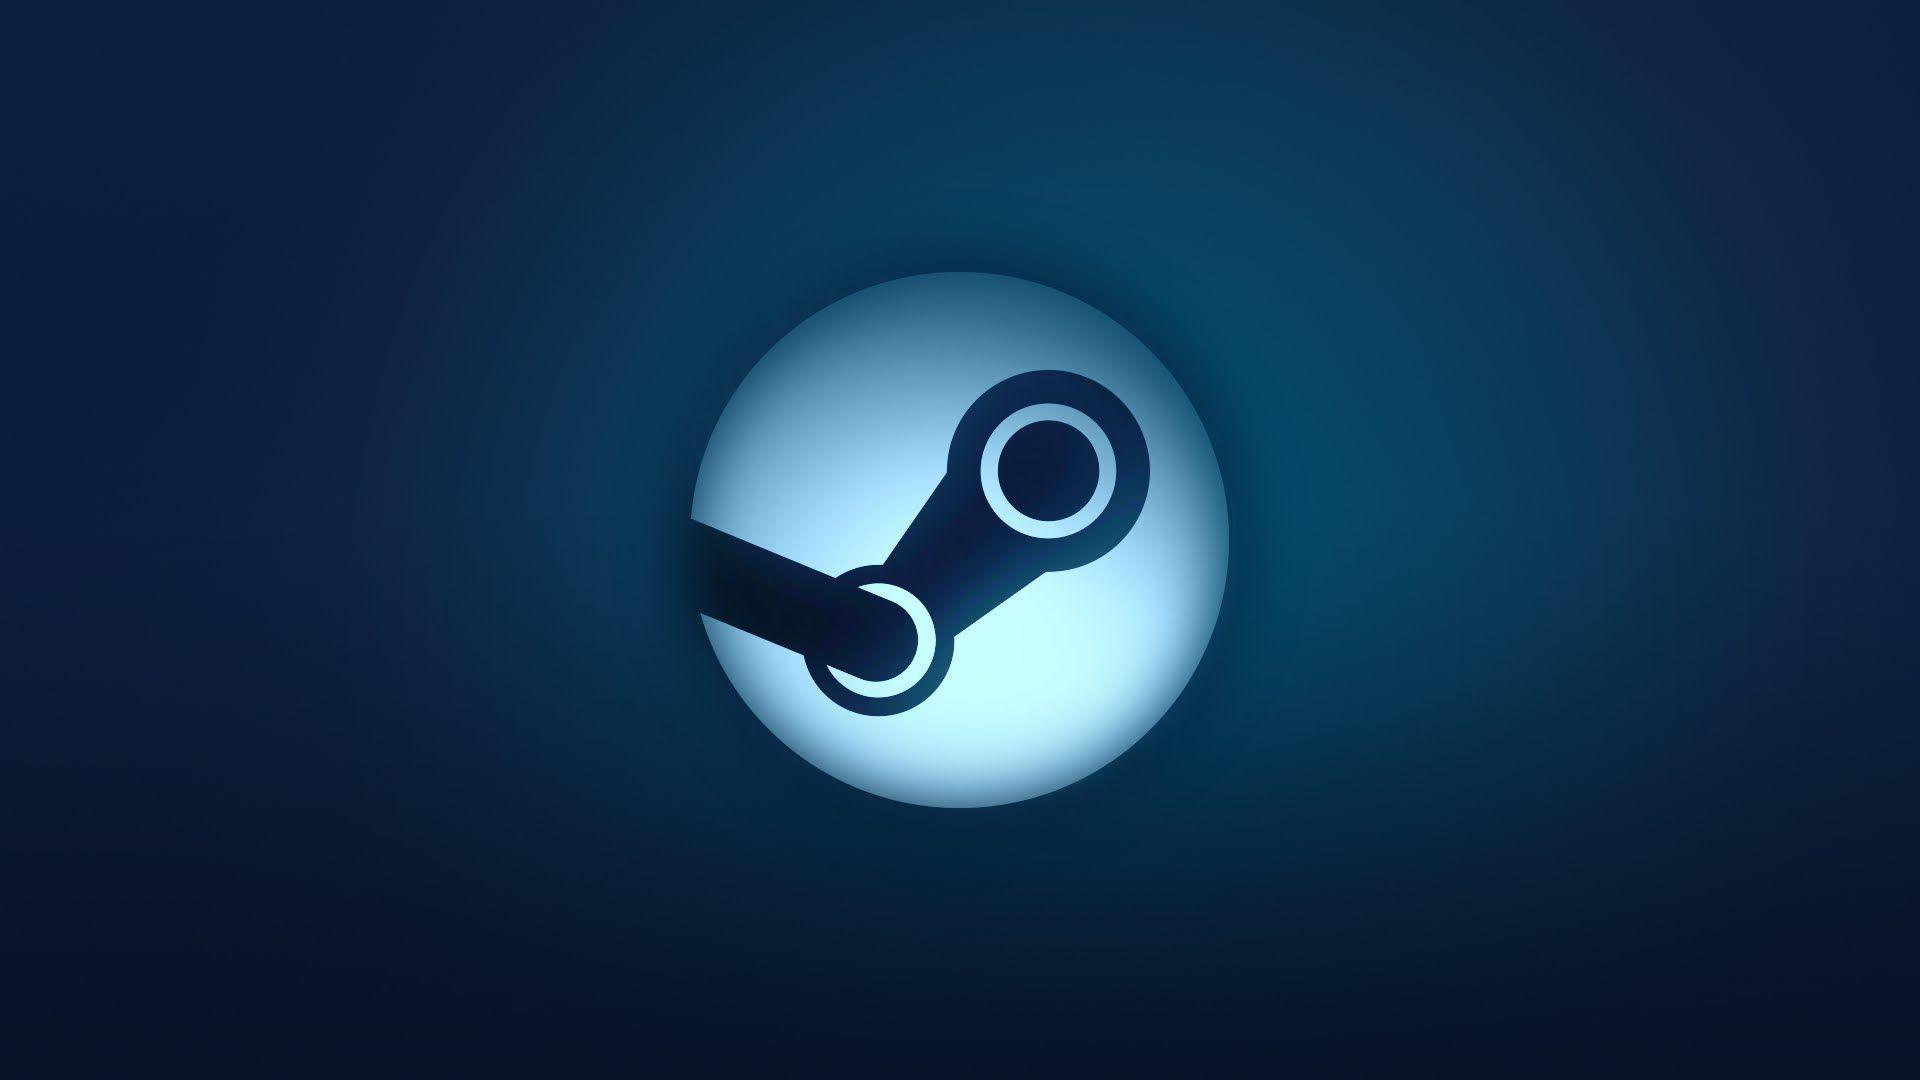 how to download wallpapers from steam workshop